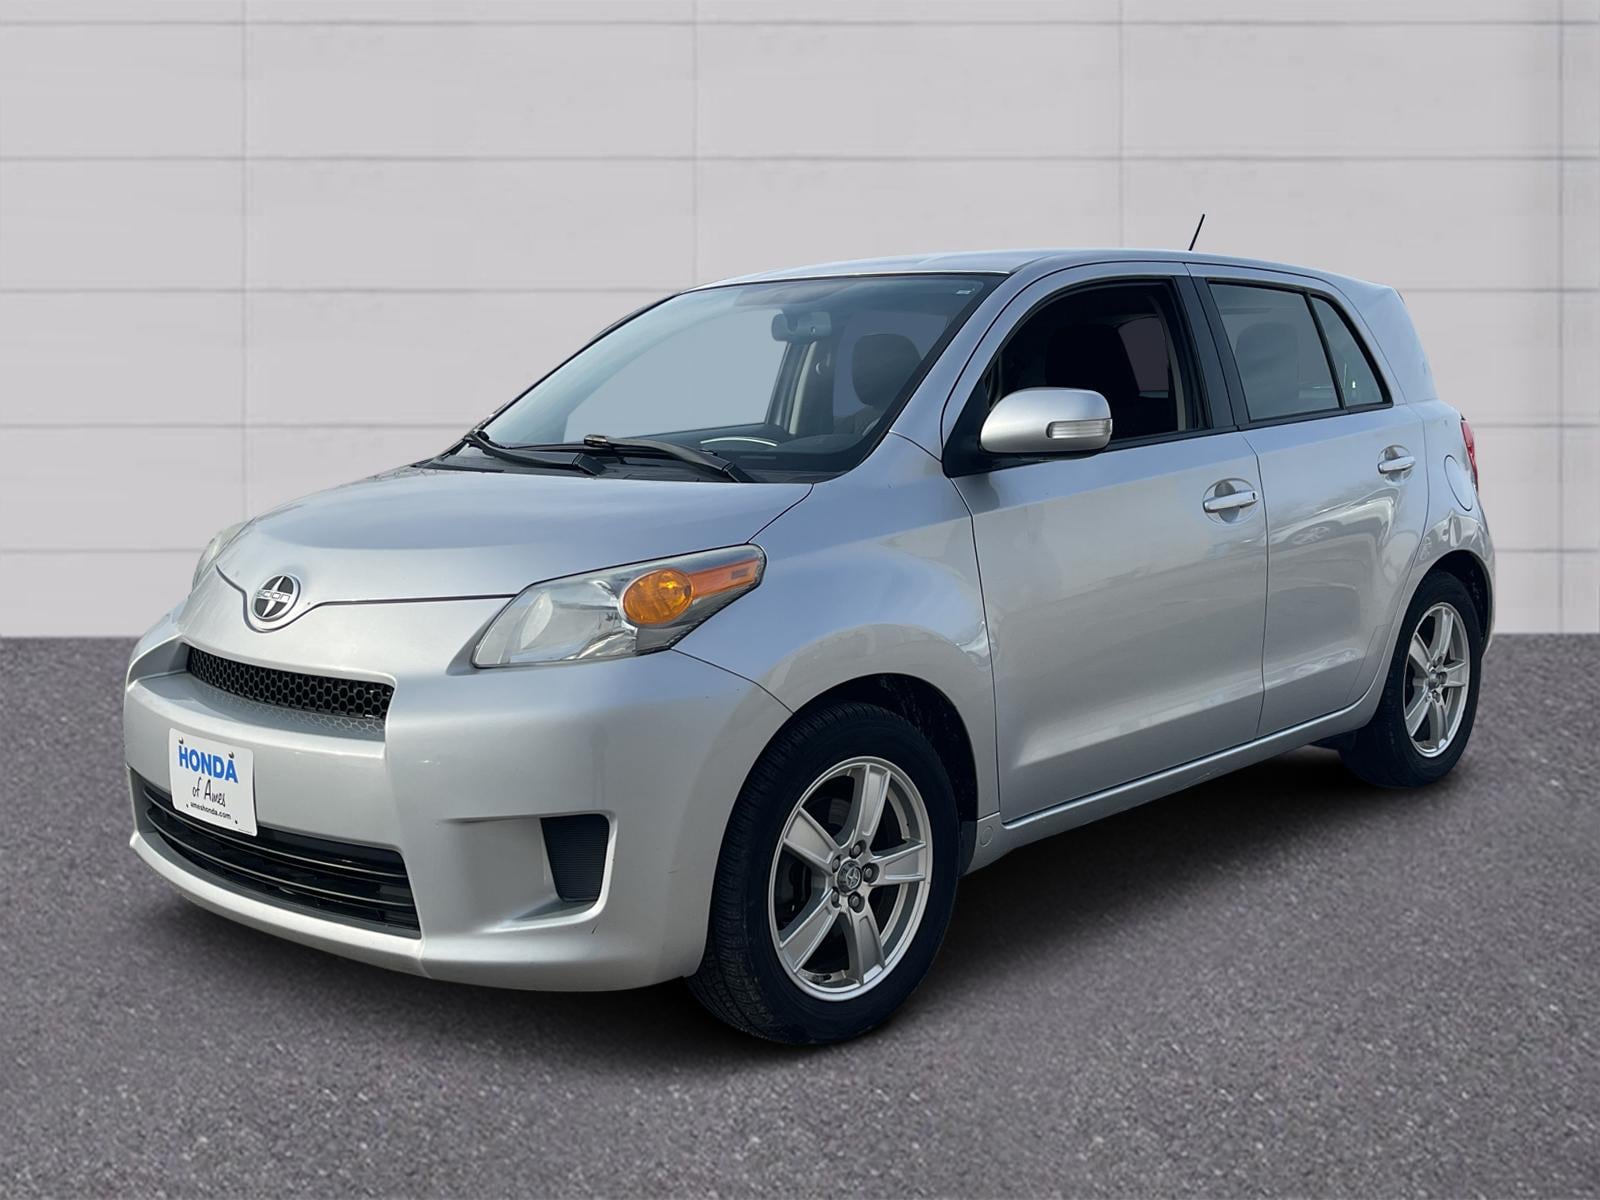 Used 2013 Scion xD Hatchback For Sale in Ames IA | Stock: D1034468K